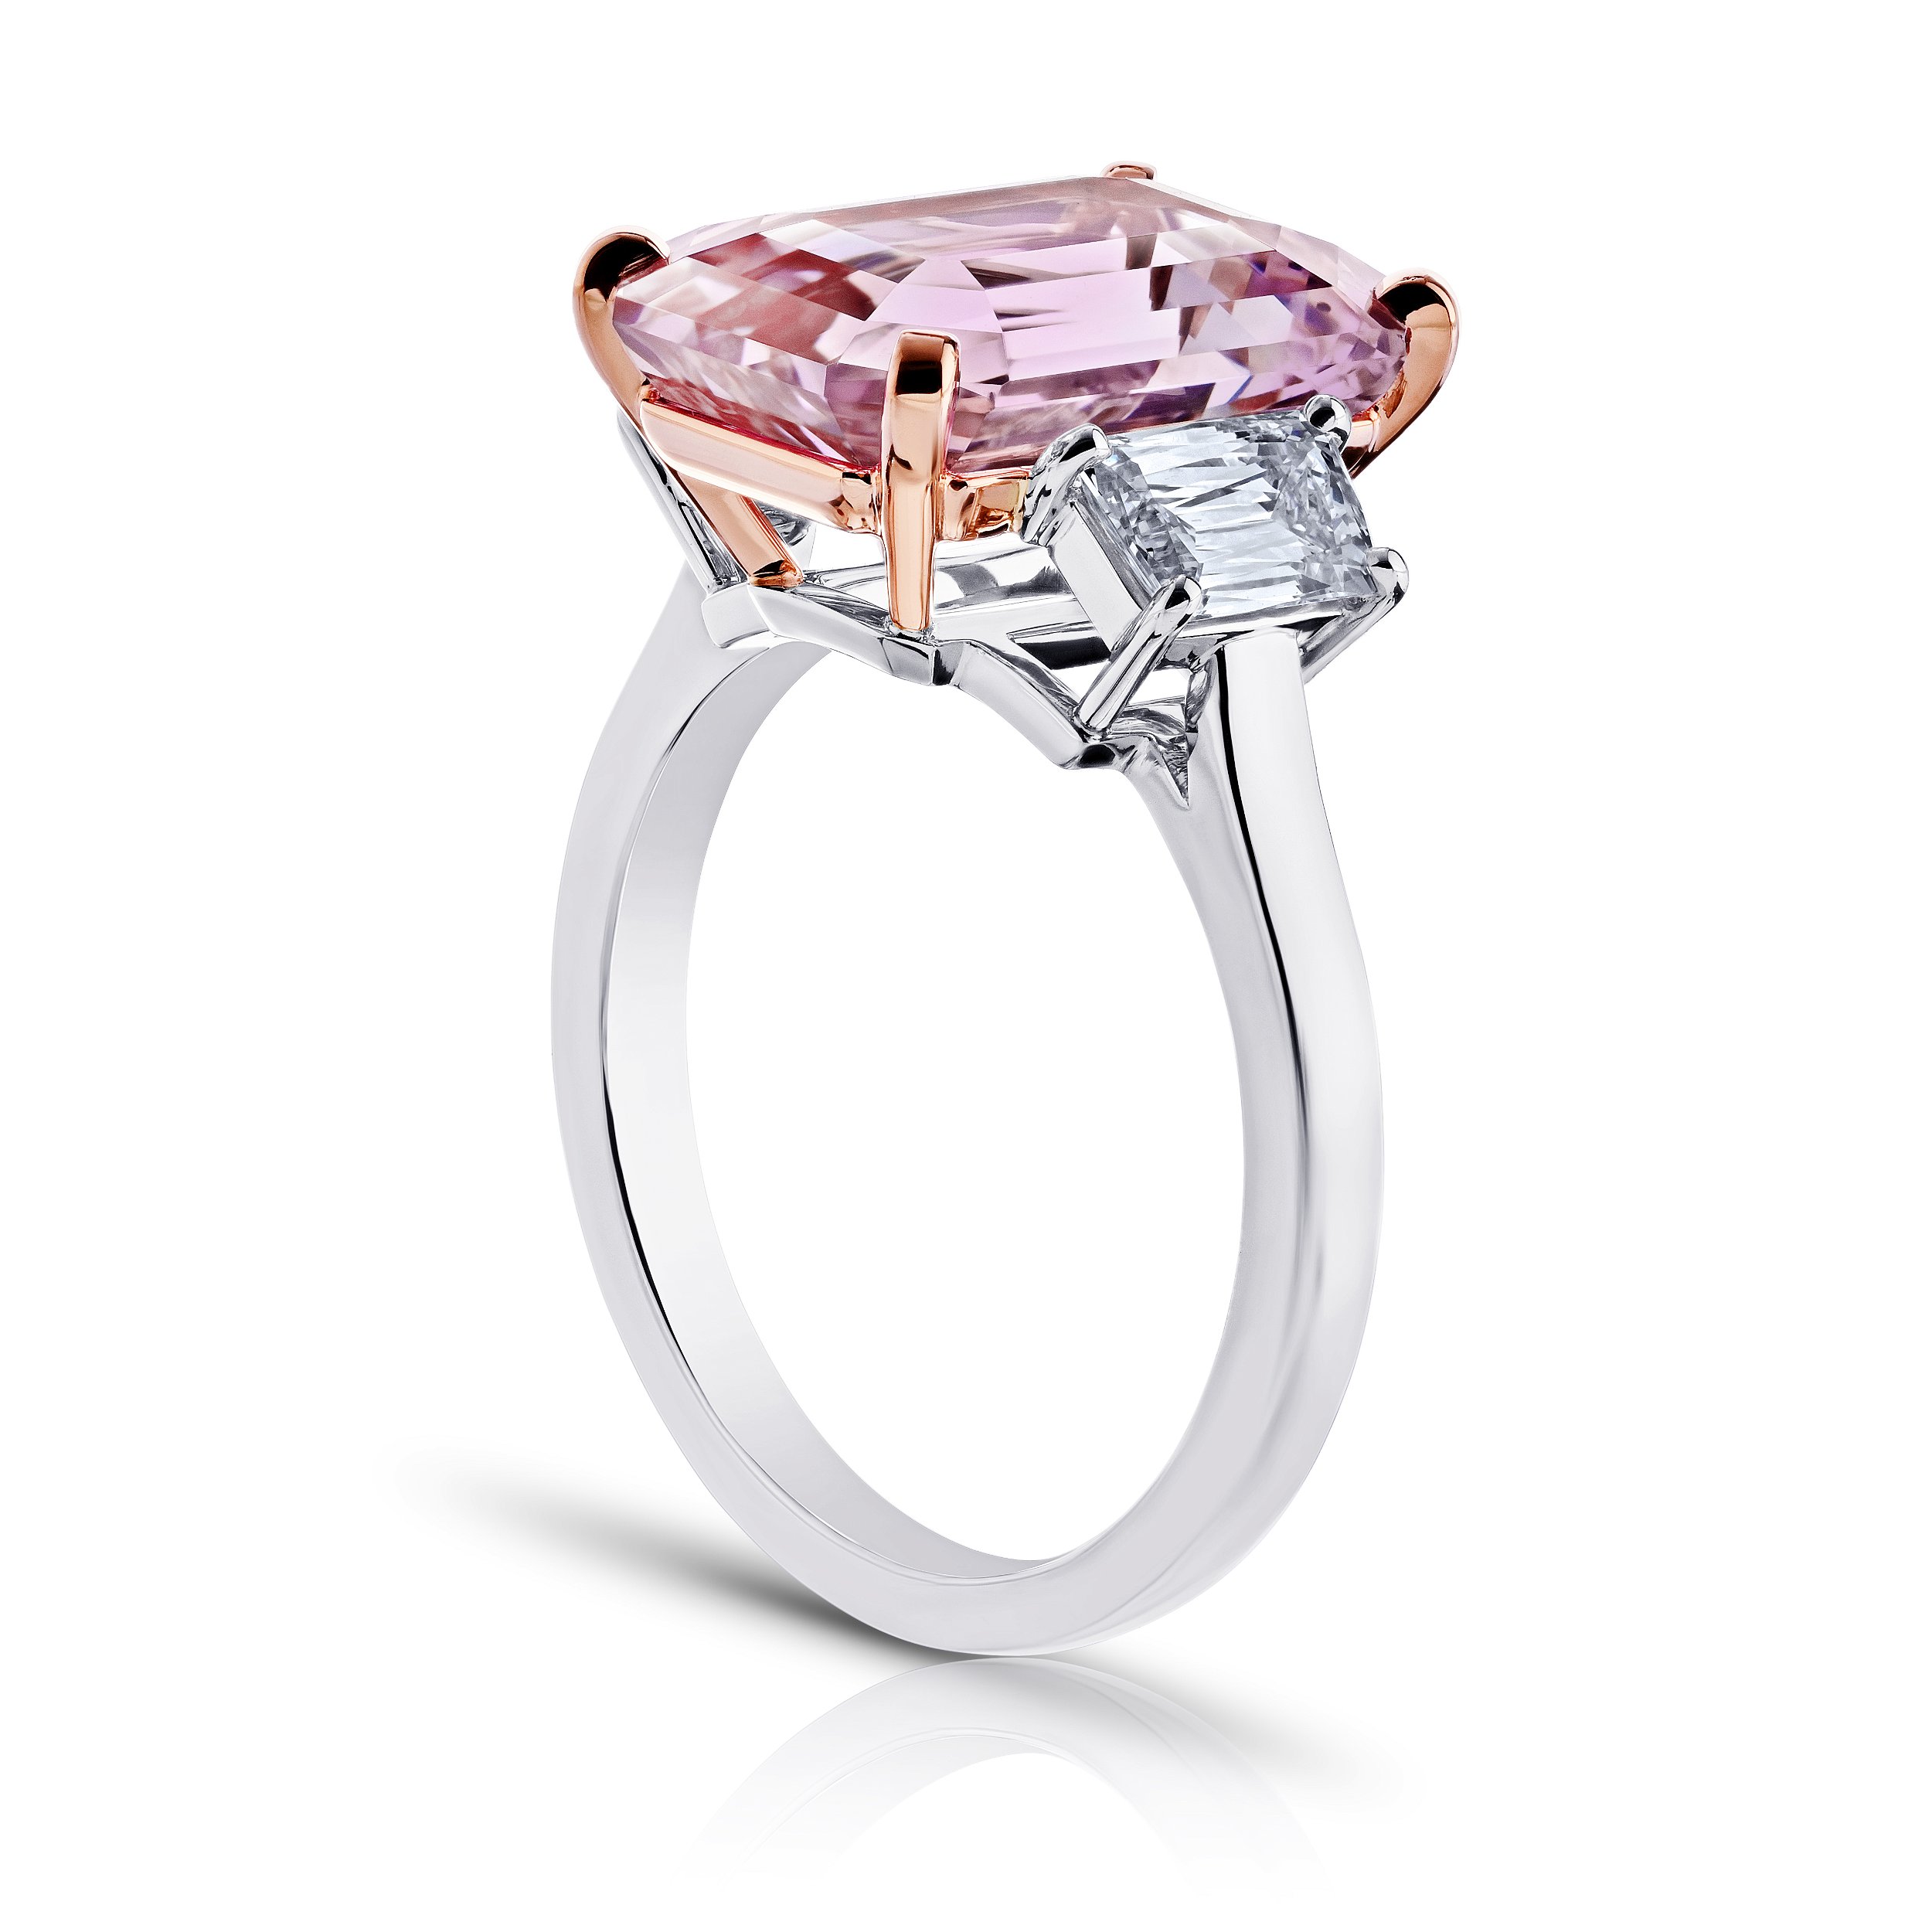 8.09ct Emerald Cut Pink Sapphire (NH) Ring in Platinum and Rose Gold